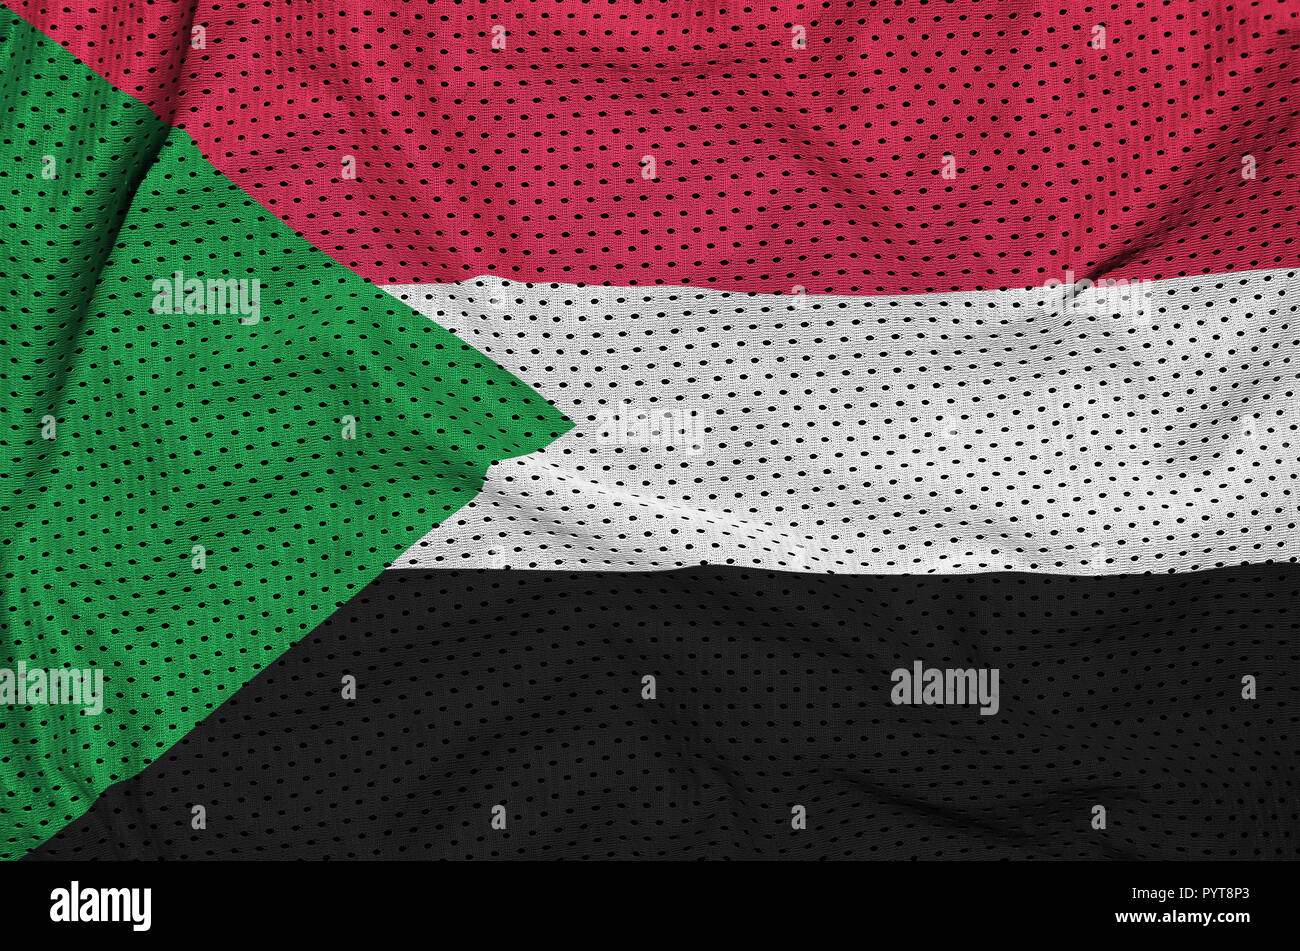 Sudan flag printed on a polyester nylon sportswear mesh fabric with some folds Stock Photo